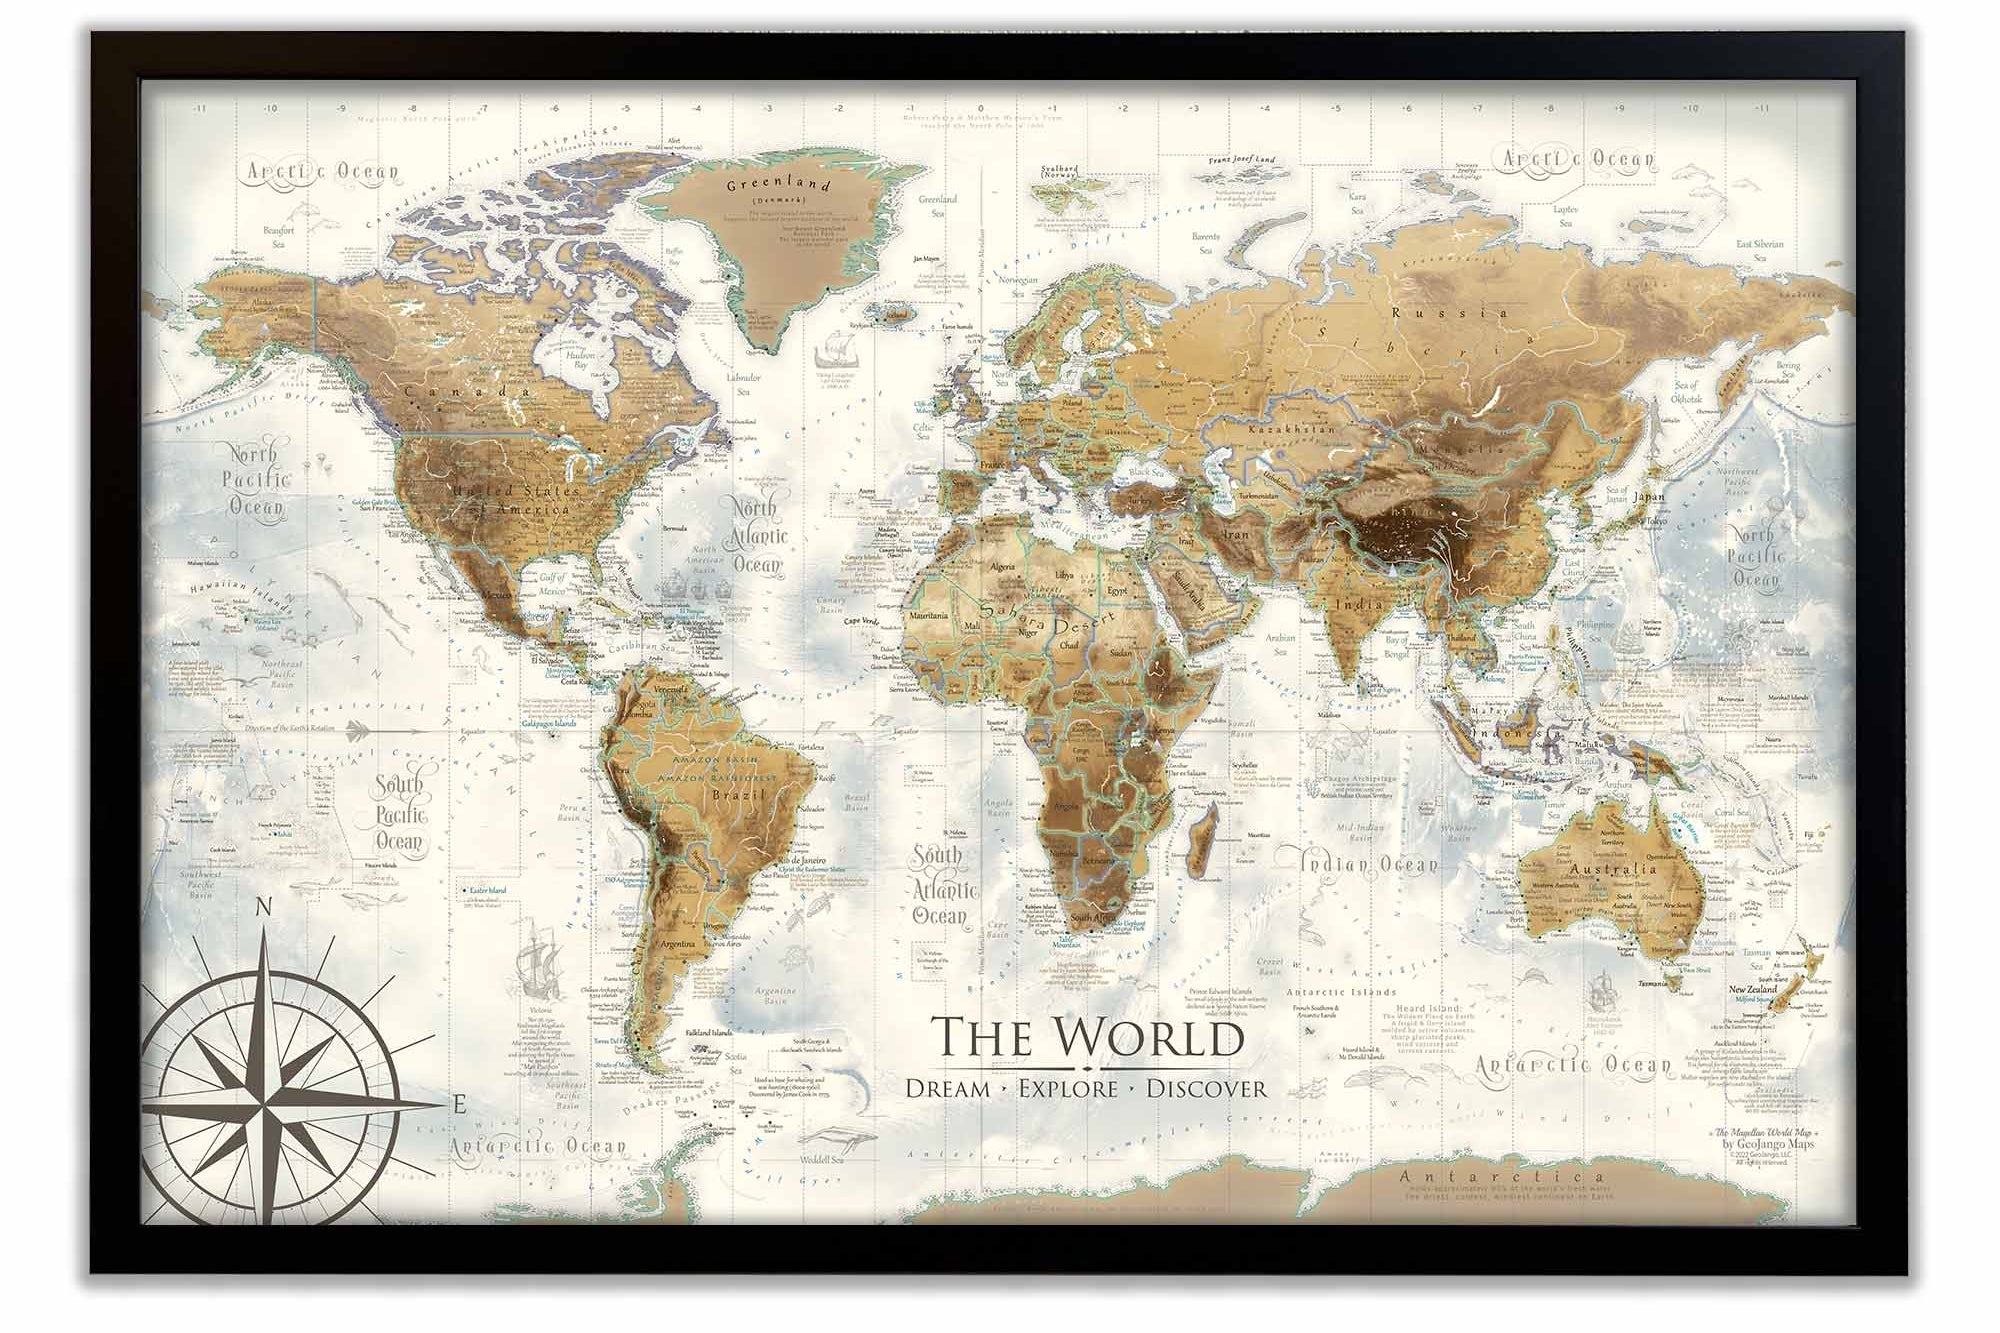 Vintage World Travel Map with Modern Geography